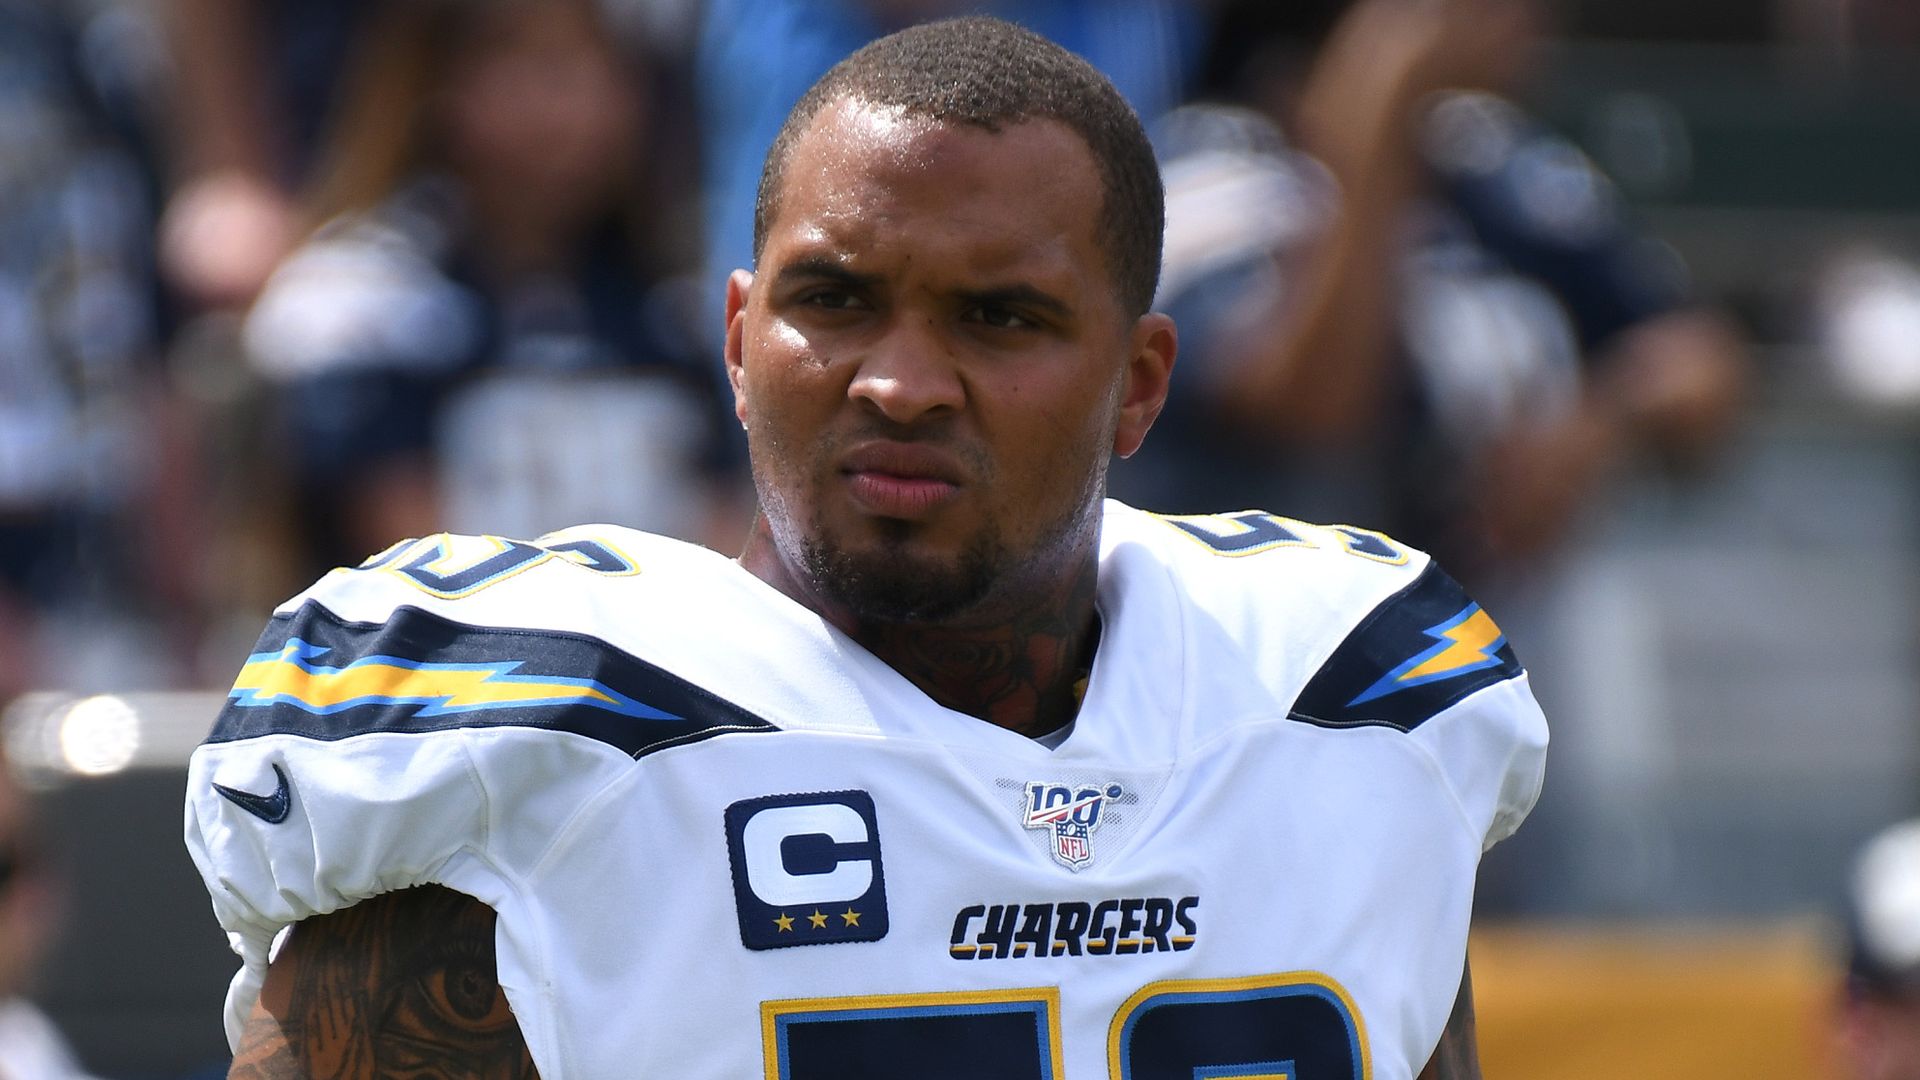 Chargers' Pouncey to miss